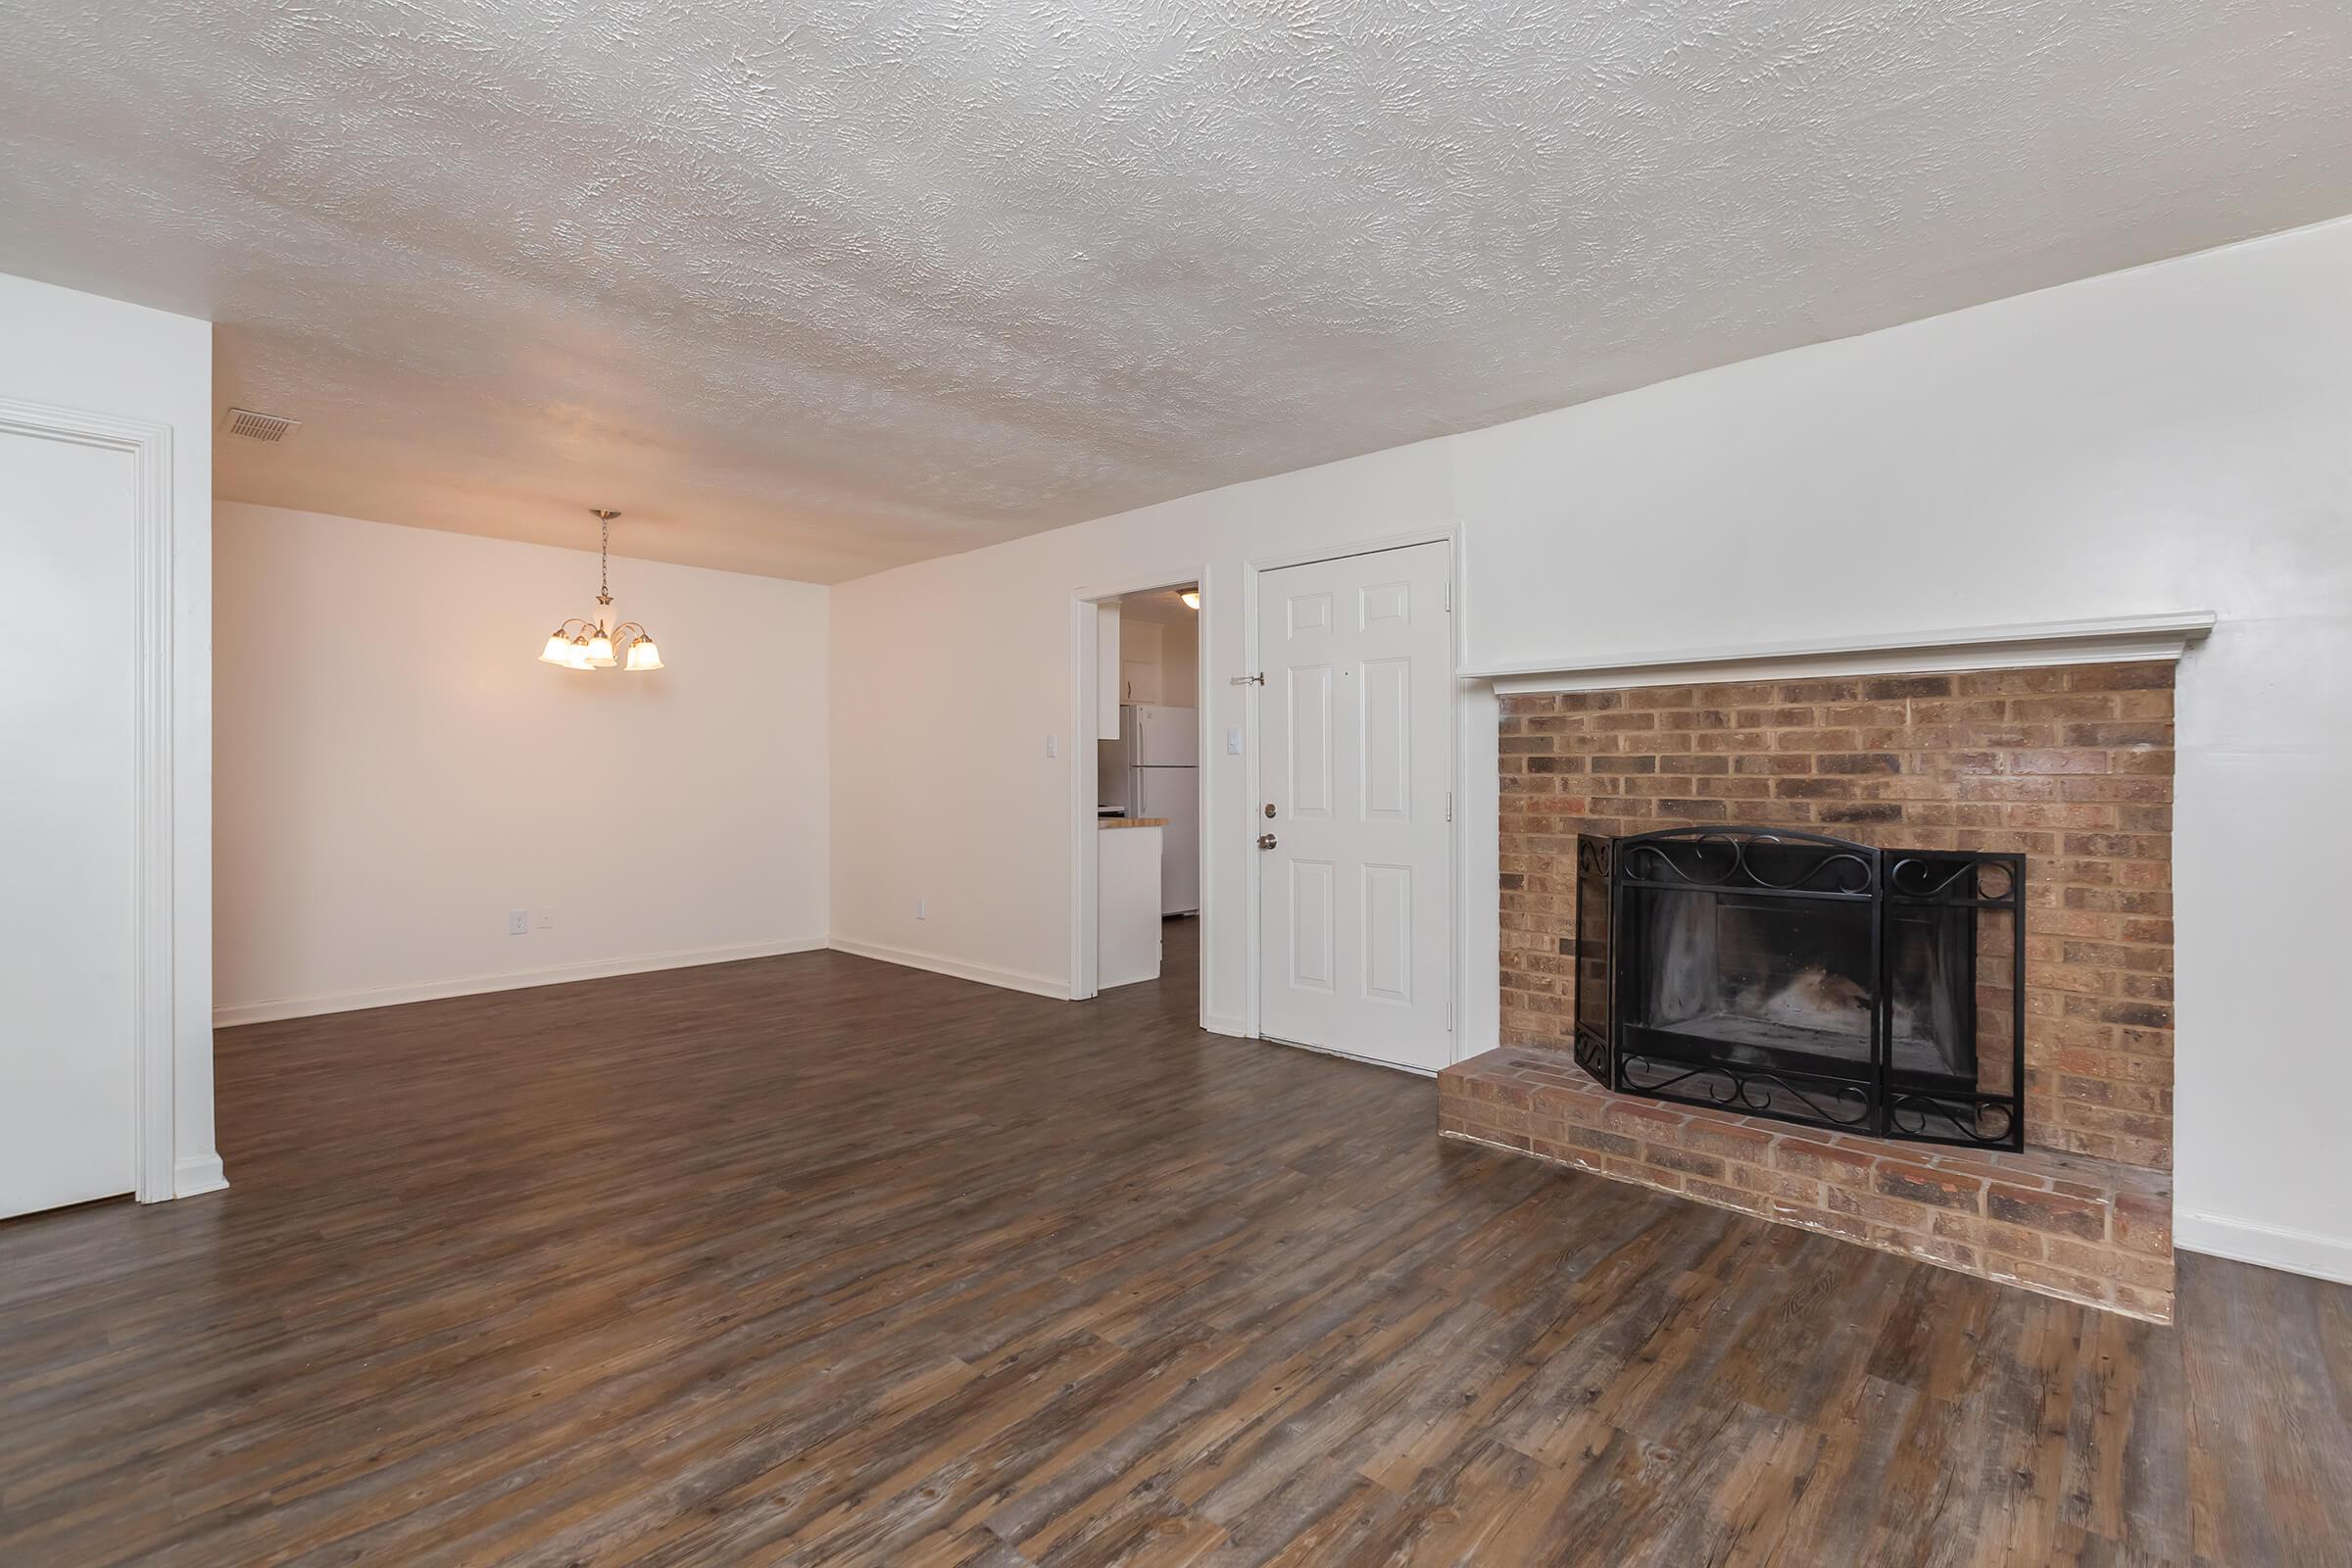 2 BEDROOM APARTMENT WITH WOOD BURNING FIREPLACE